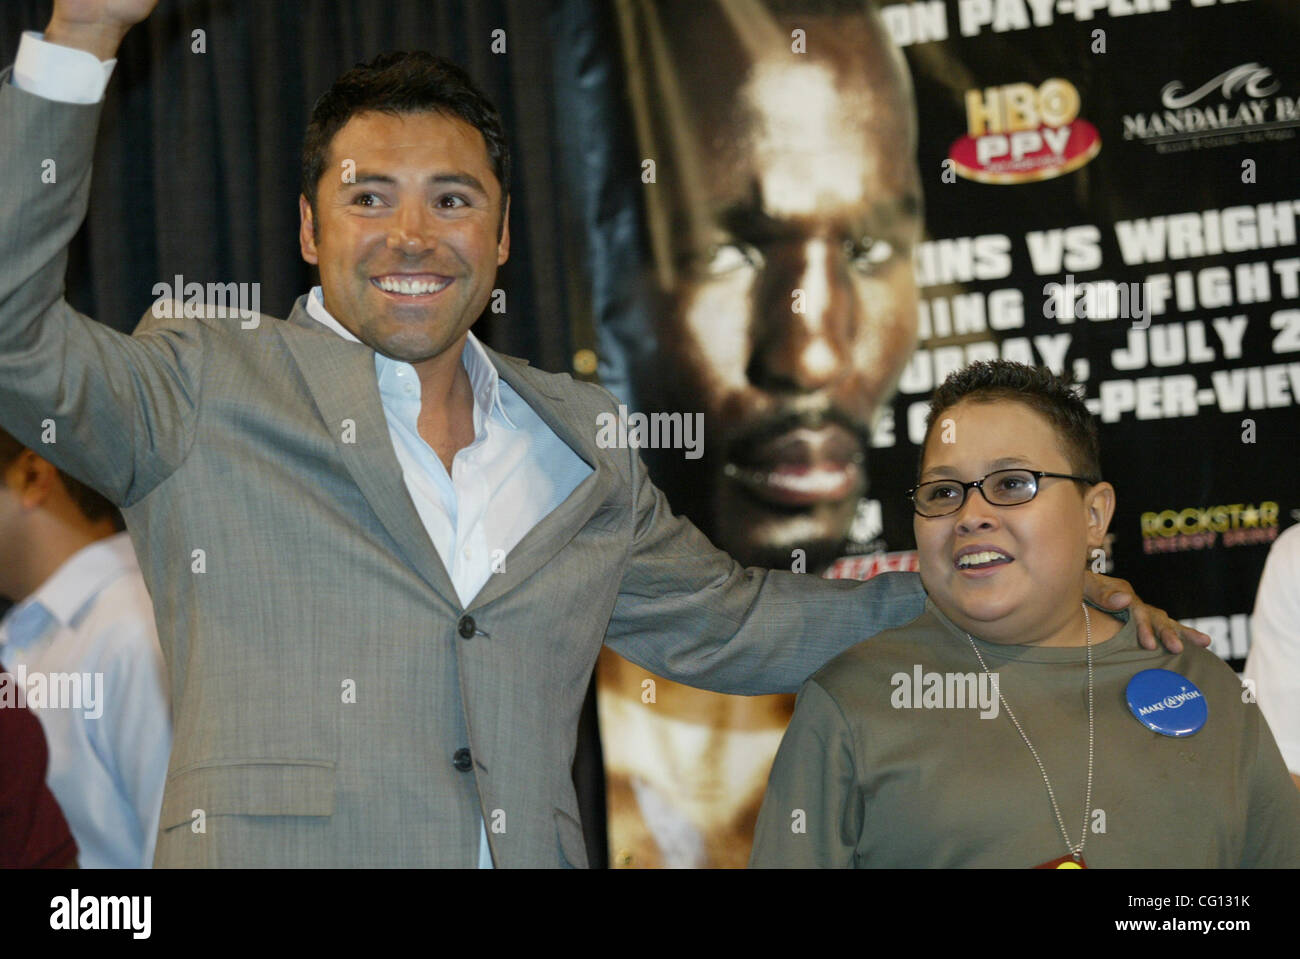 07-20-07 at the Manady Lay Bay Events Center during the BERNARD HOPKINS and  WINKY WRIGHT weigh-ins. Golden Boy Promoter and Champion Boxer OSCAR DE LA HOYA with CRUZ BARAJAS. Make a Wish Foundation is a foundation who makes it possible  for children who have cancer make their wishes come true, they Stock Photo